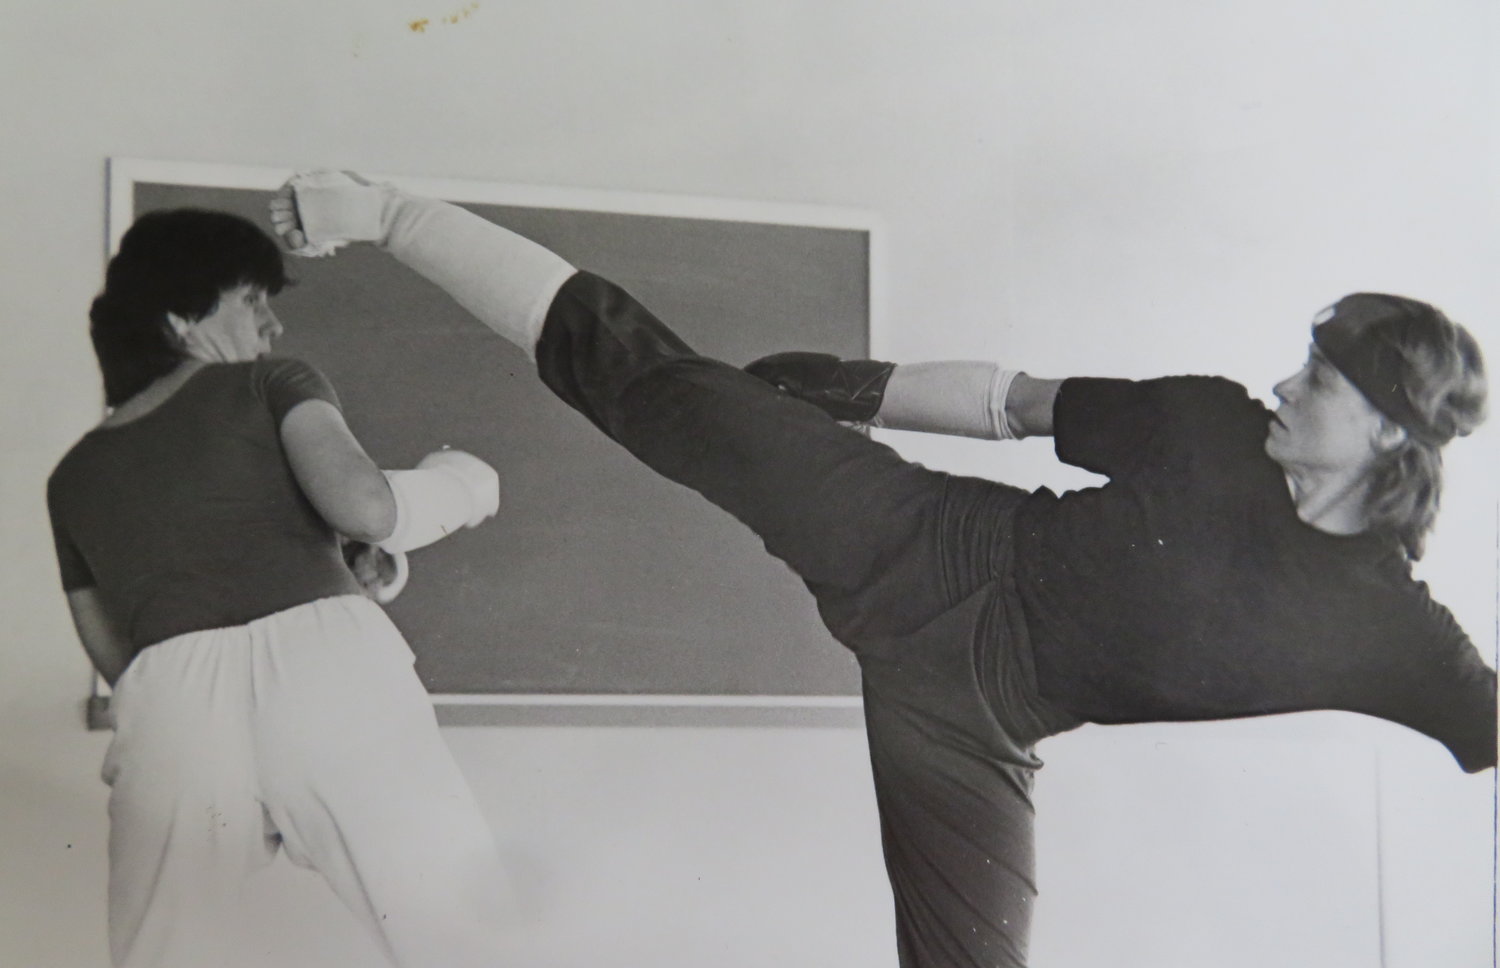 In the 1970s, Joan Nelson earned a black belt in karate and pivoted from counseling rape victims to teaching self-defense for women.